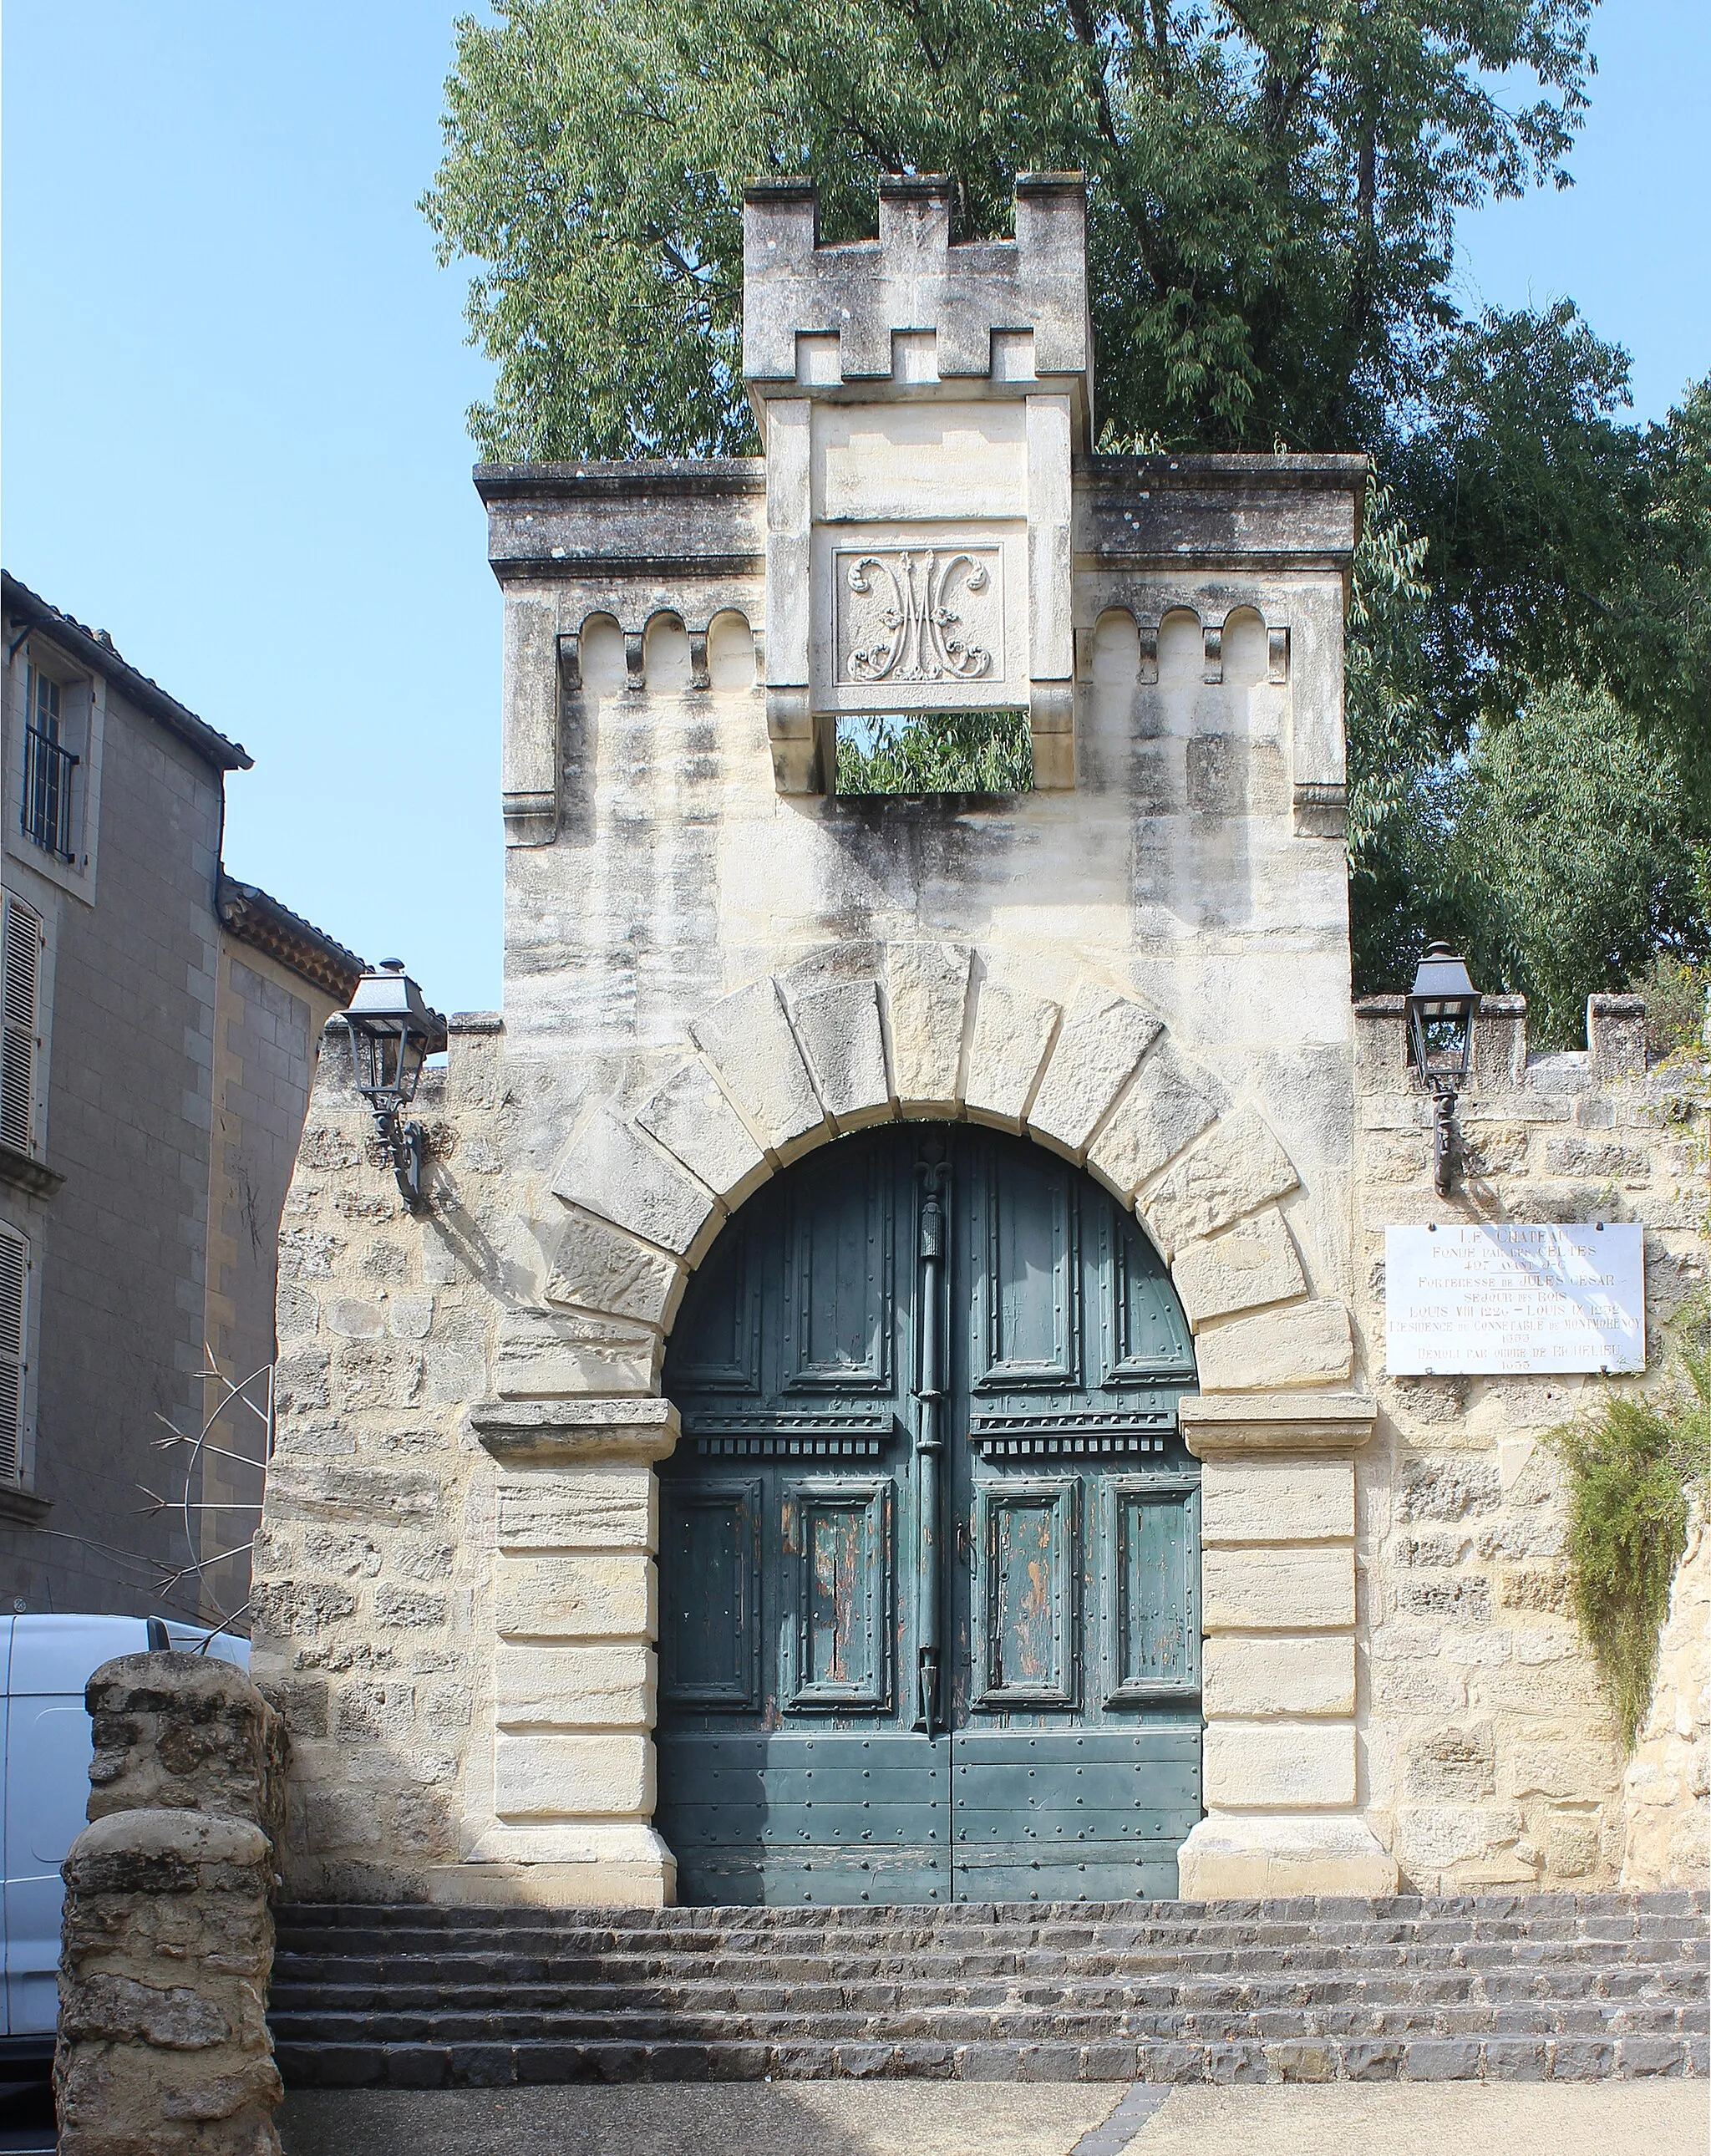 Photo showing: Gateway to the Château de Pézenas. Construction of the château started in 1262 and was rebuilt in 1563. The château was demolished by Cardinal Richelieu in 1632 and only the gateway remains.